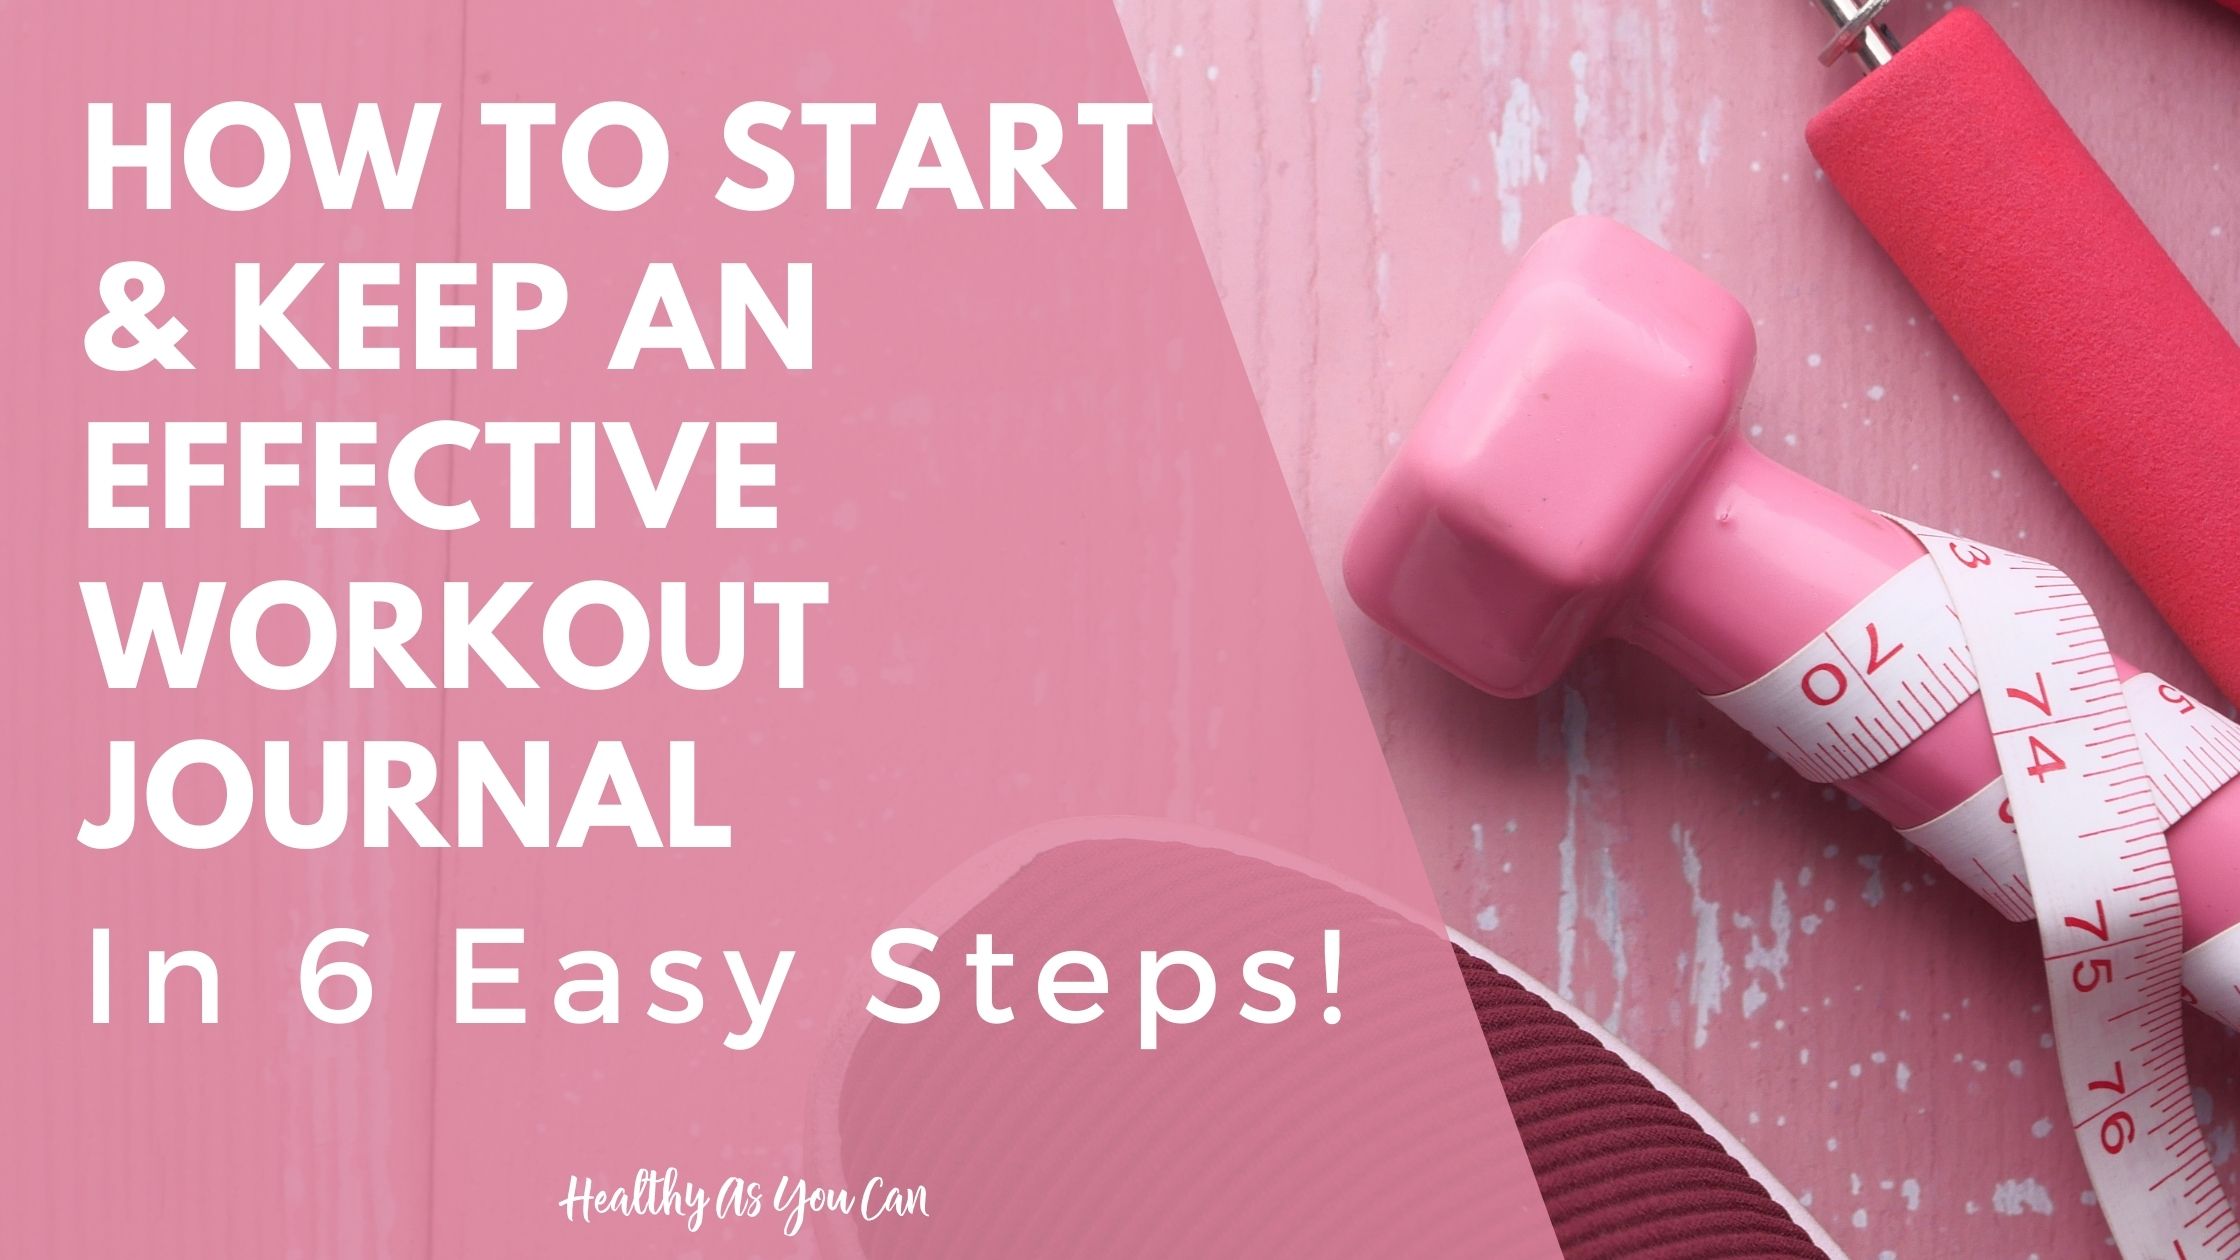 how-to-start-keep-an-effective-workout-journal-step-by-step-guide